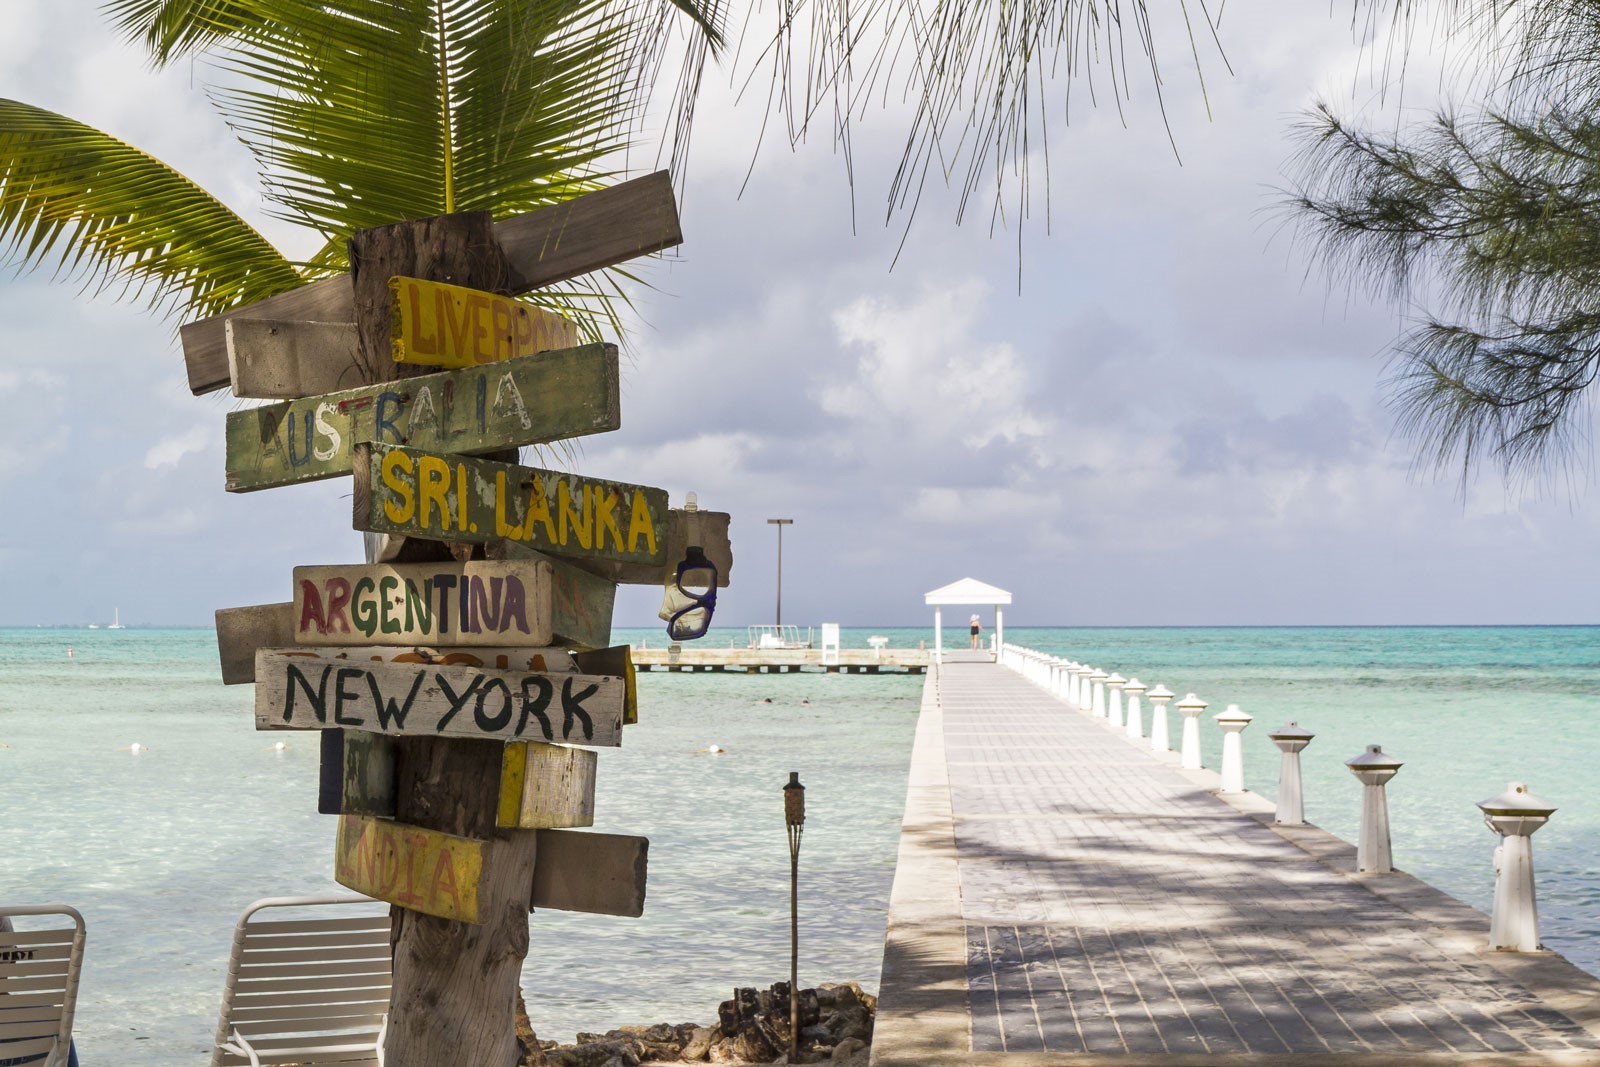 Why are the Cayman Islands popular?